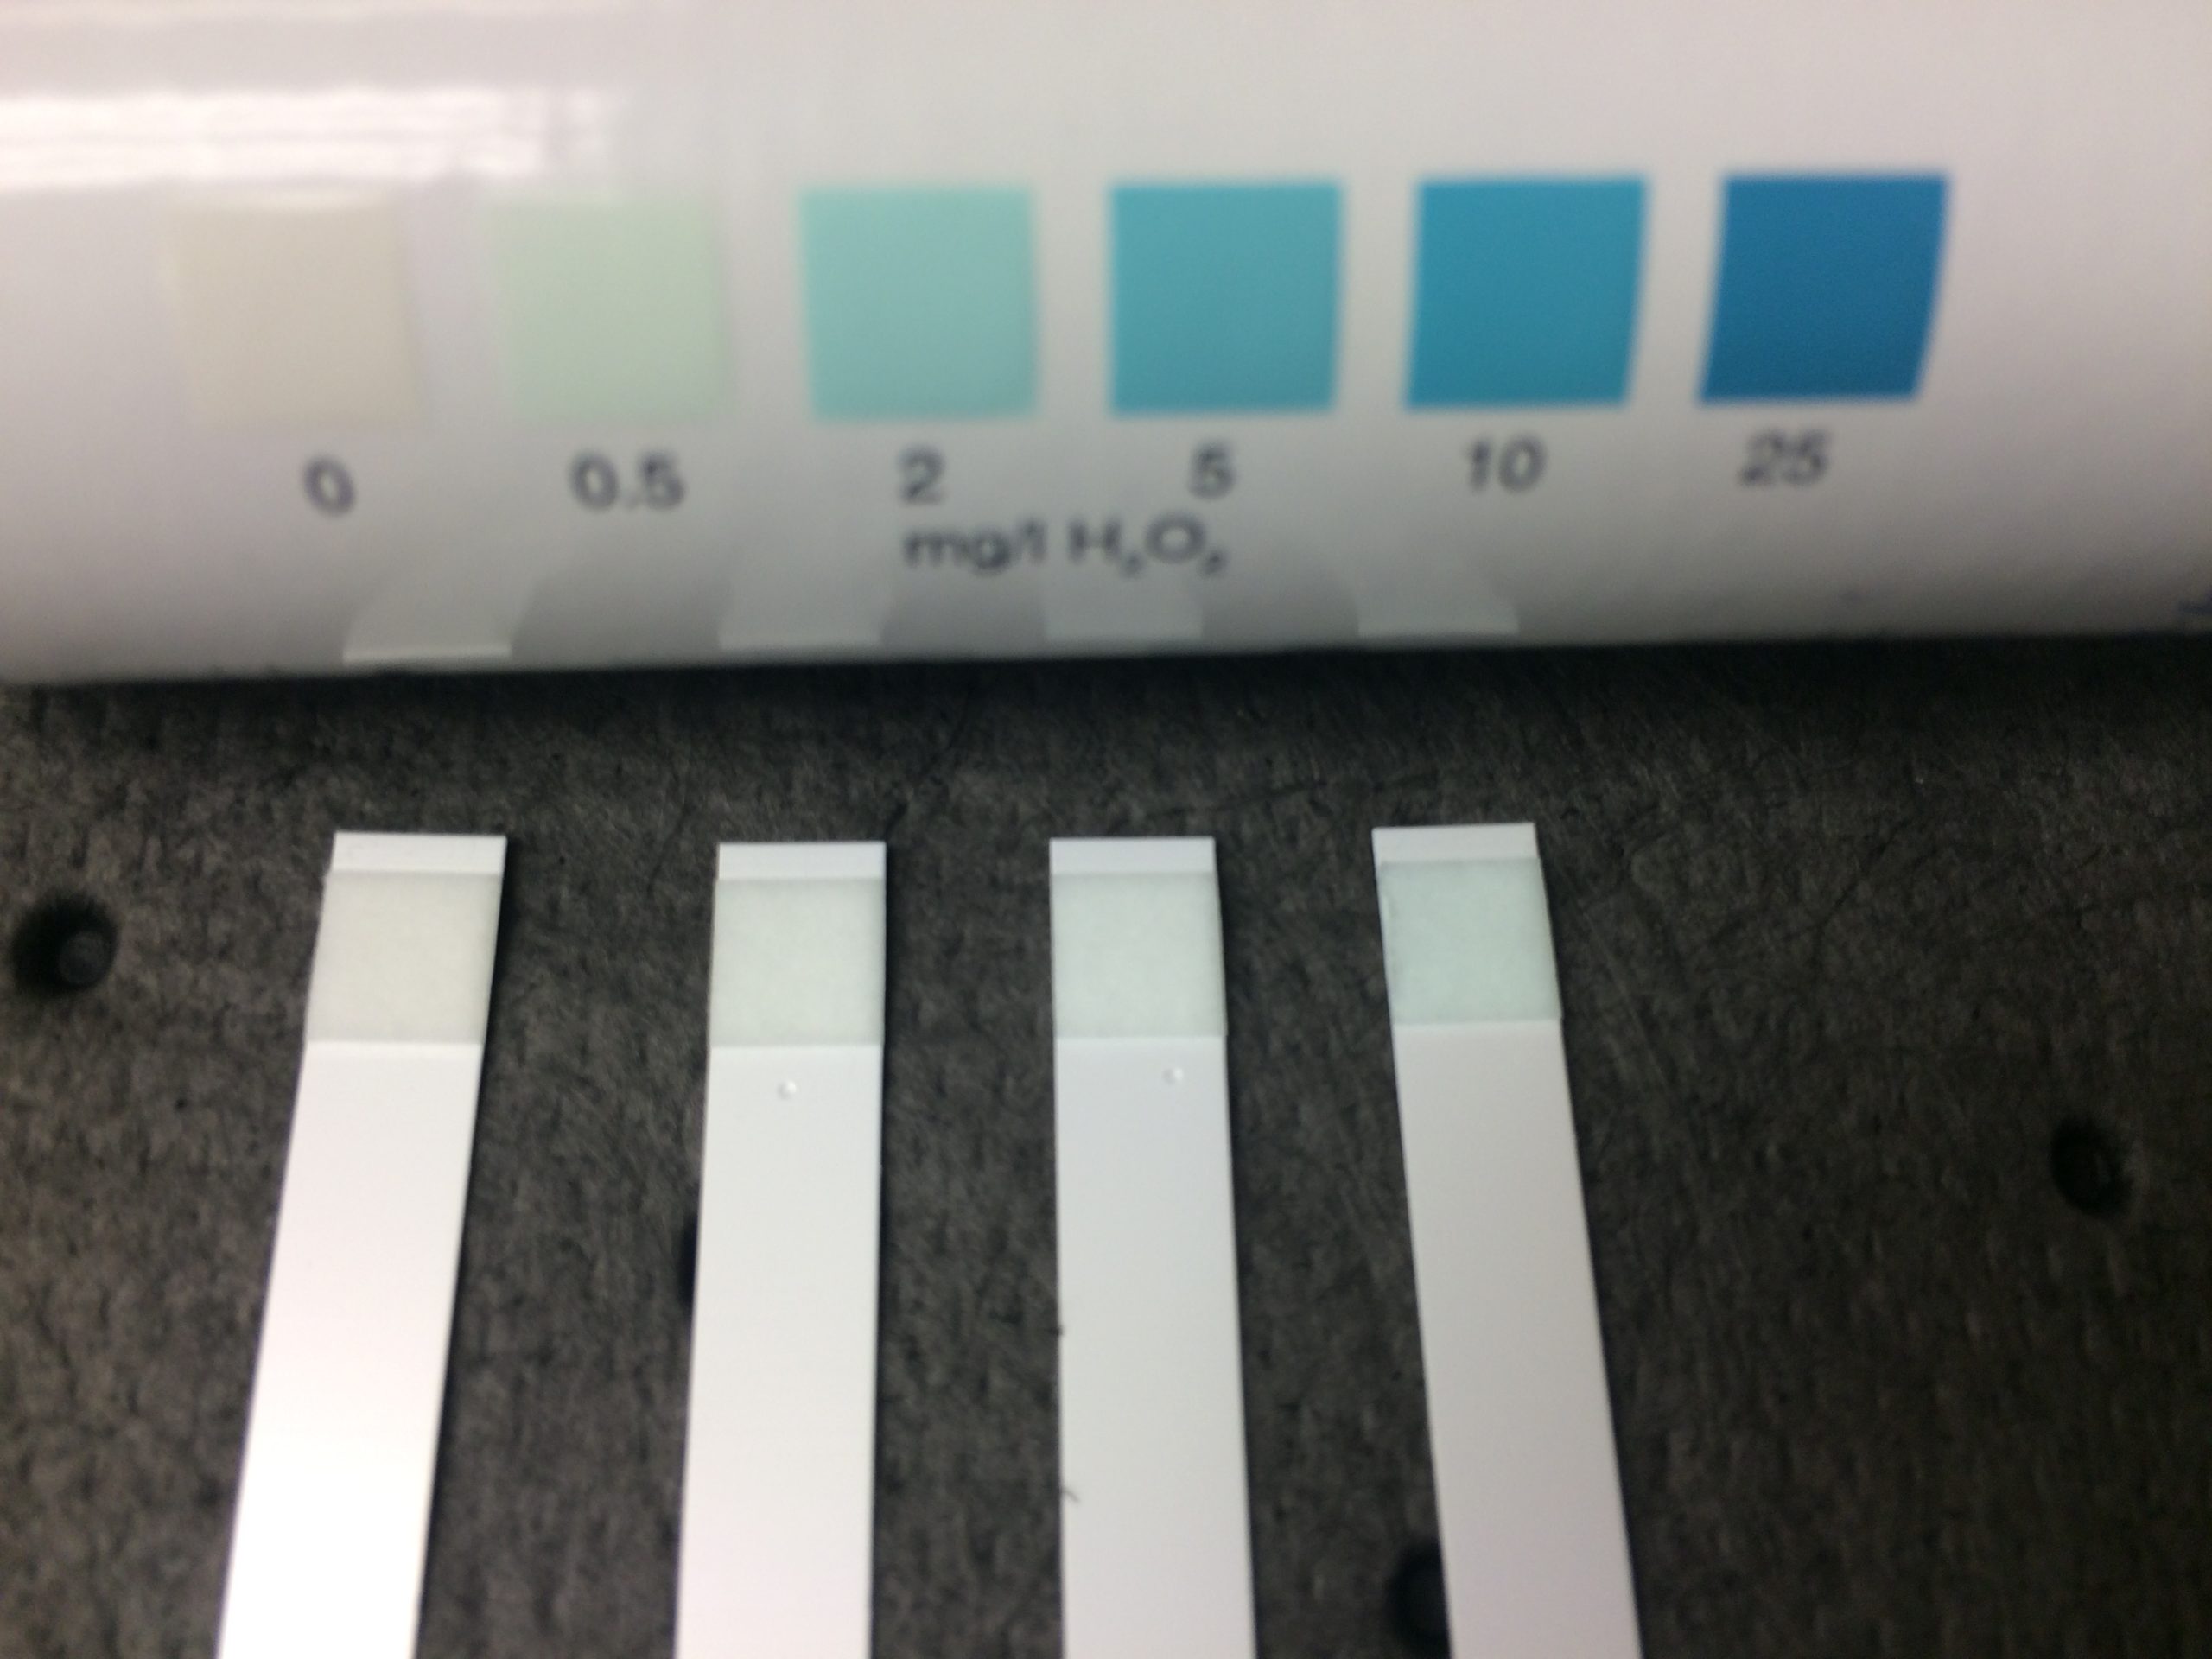 4 hydrogen peroxide test strips of increasing concentration being read against the corresponding color chart